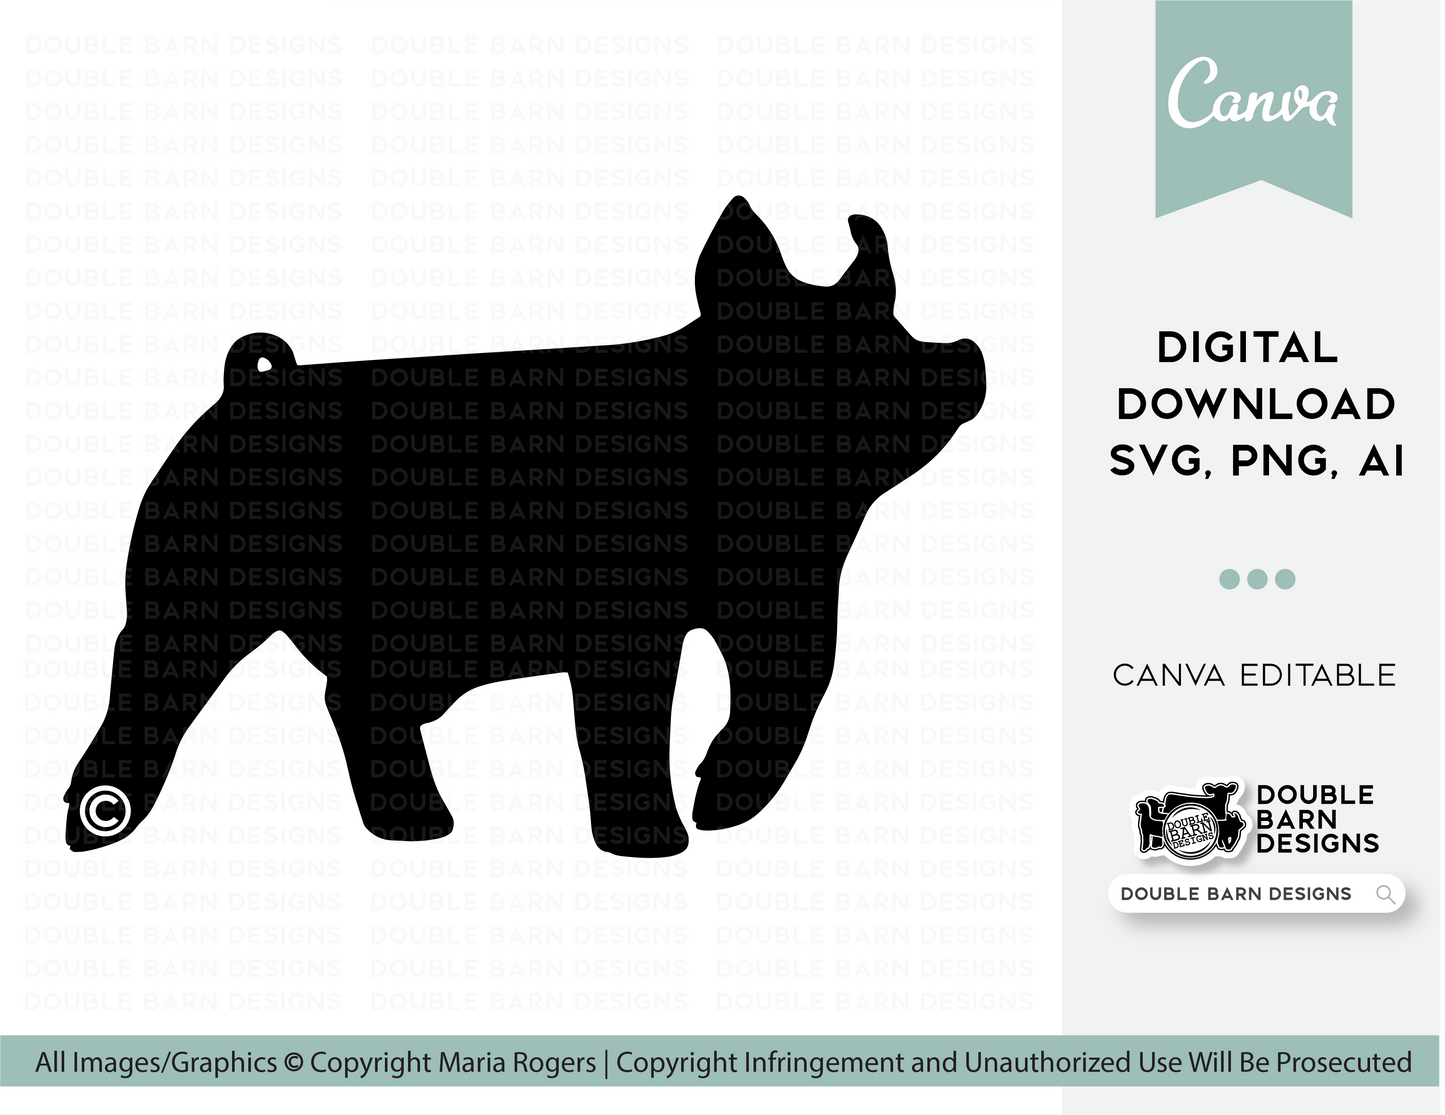 NEW for '23 | Show Pig Digital Download | Outline Version & Silhouette Version | SVG PNG Ai Files Included